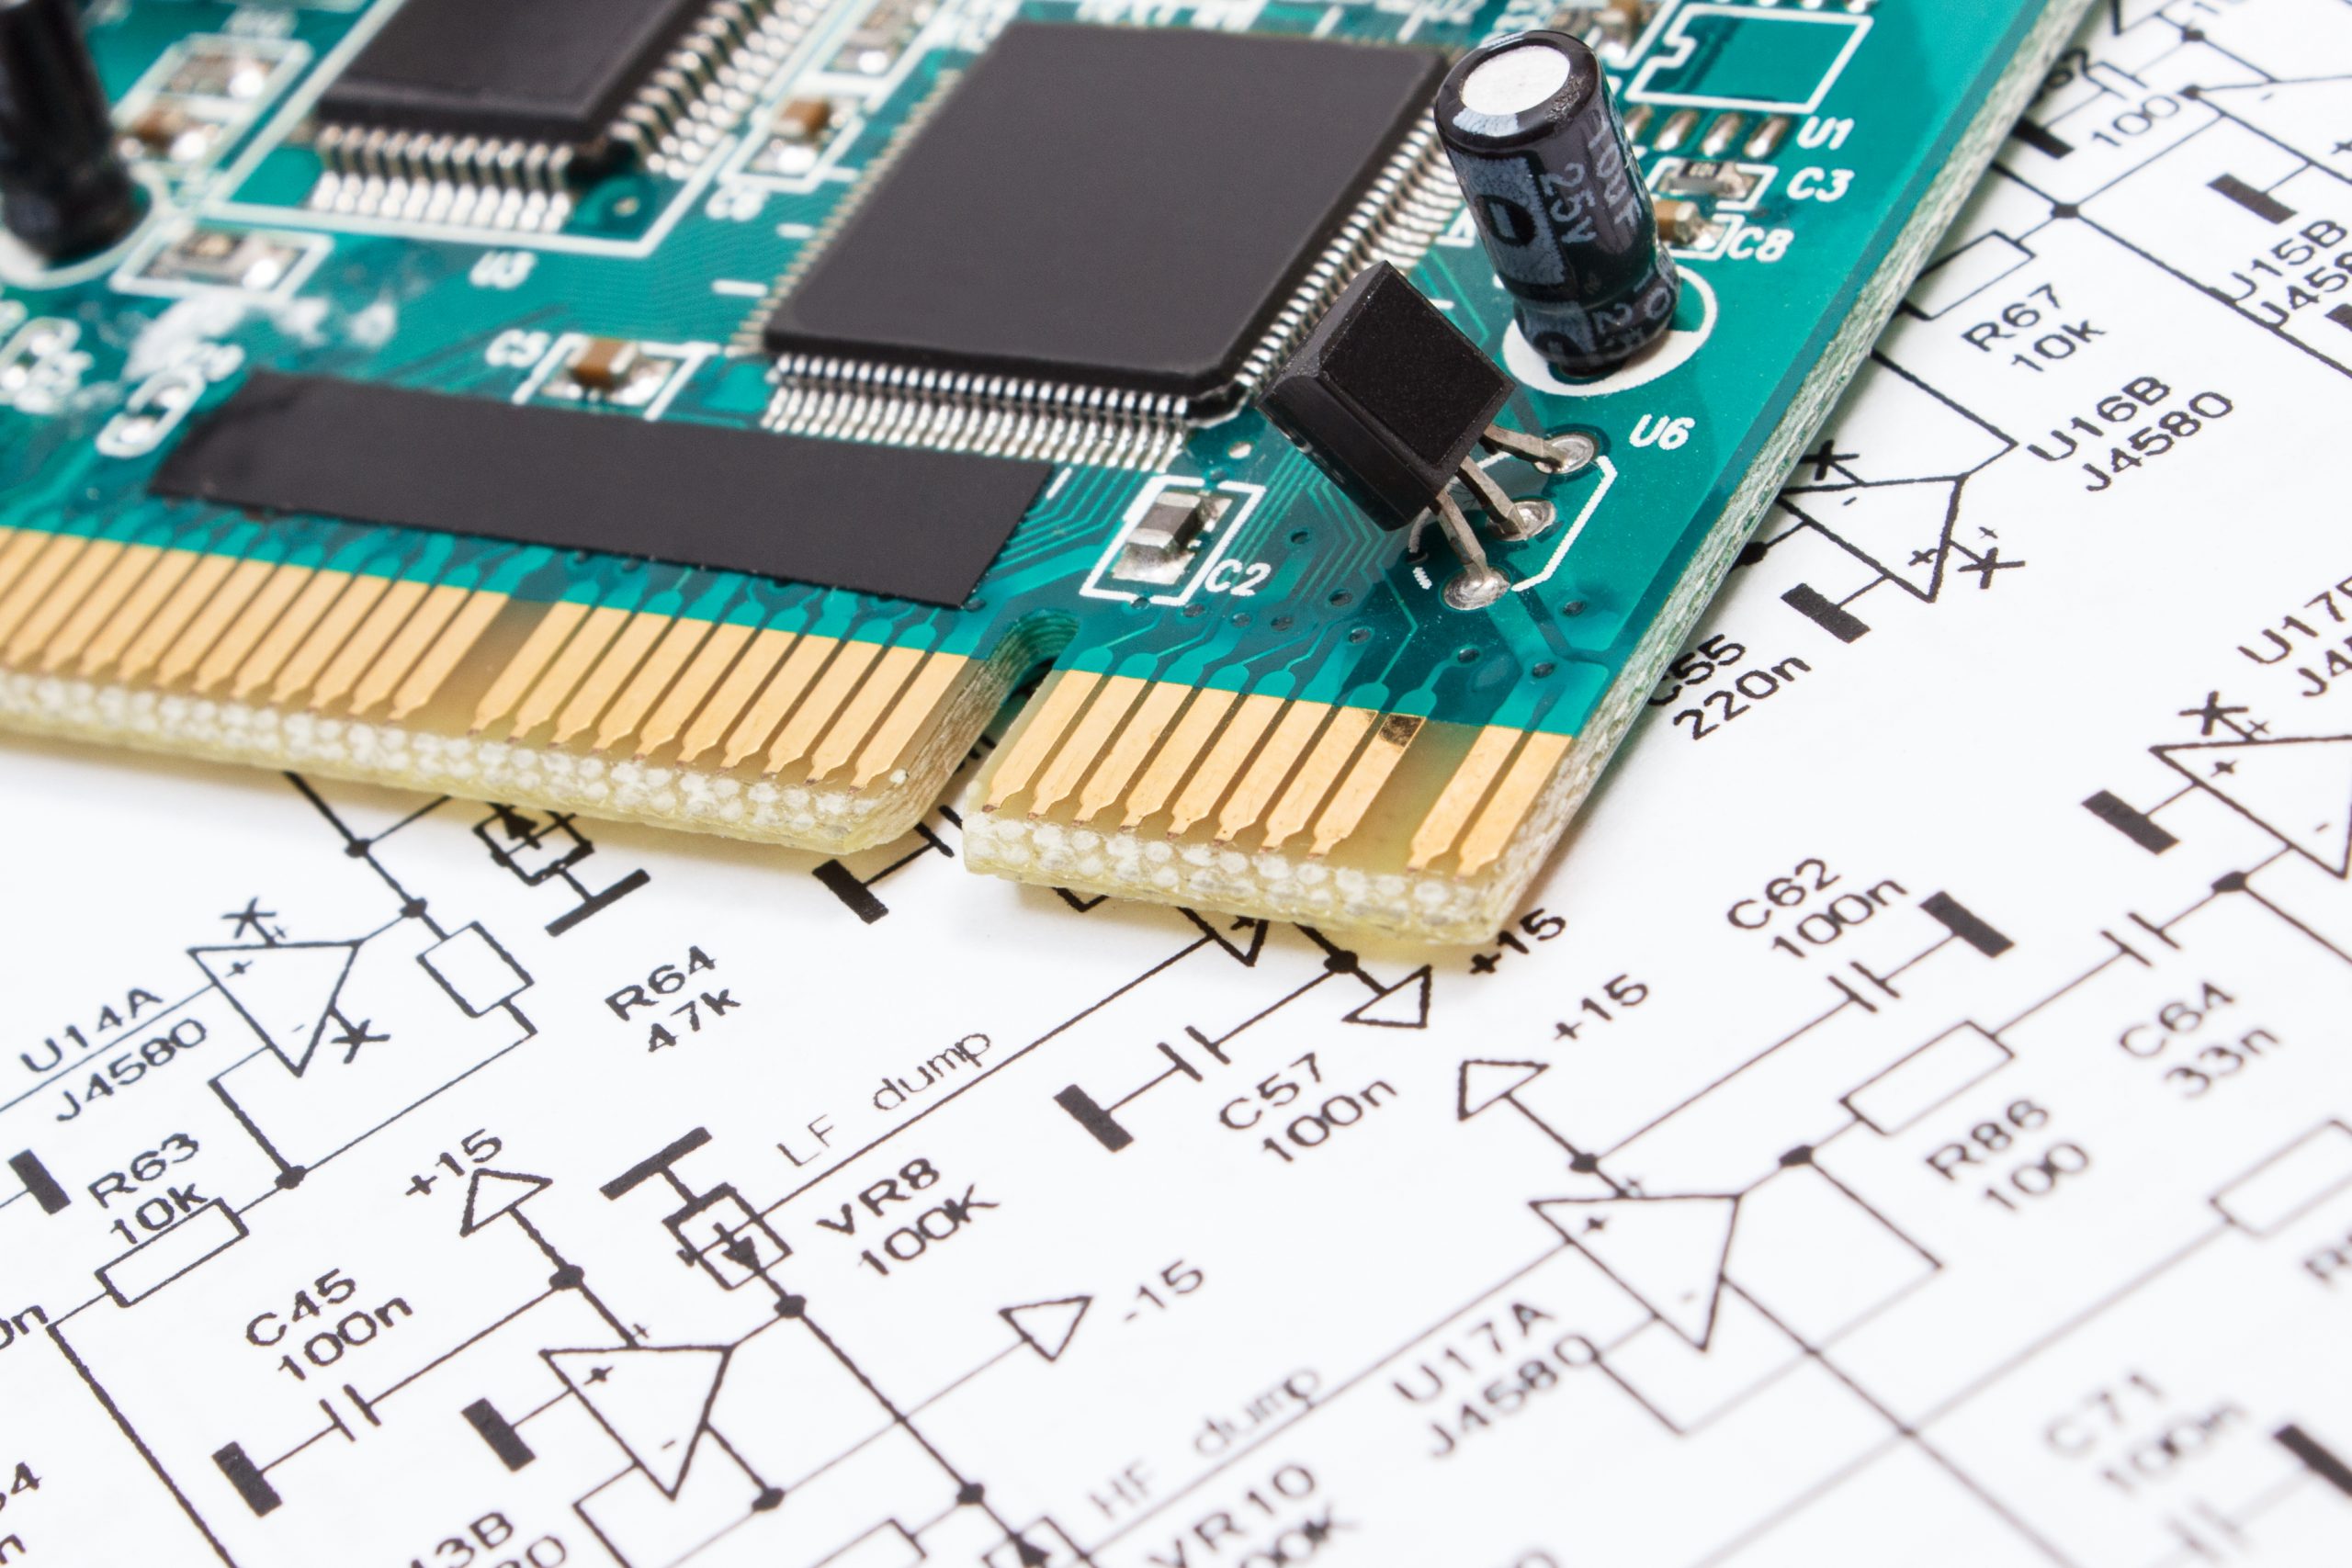 7 Must-Know PCB Design Software Programs for Electrical Engineers and Designers